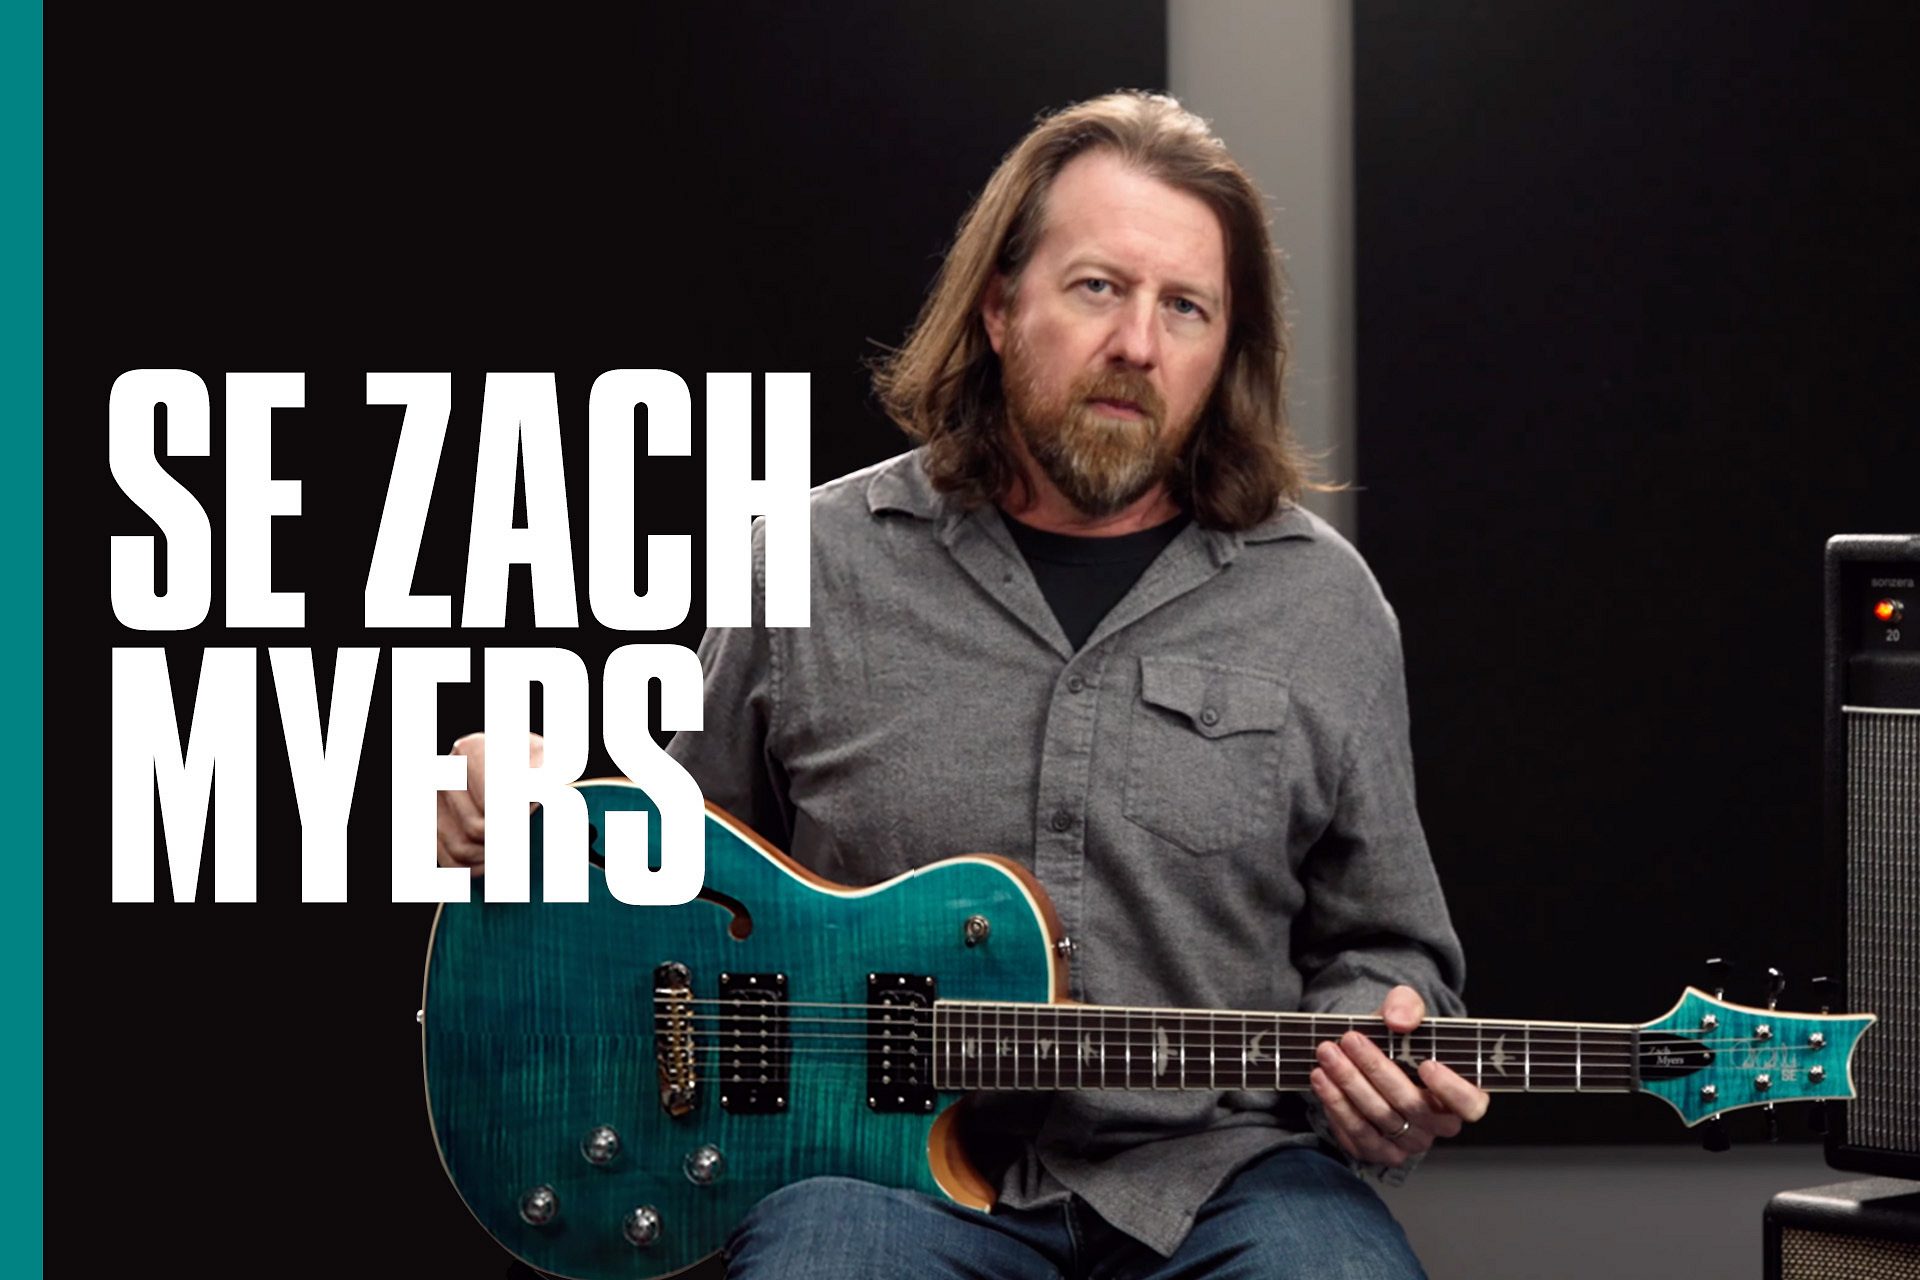 Listen to a Demo of the SE Zach Myers!